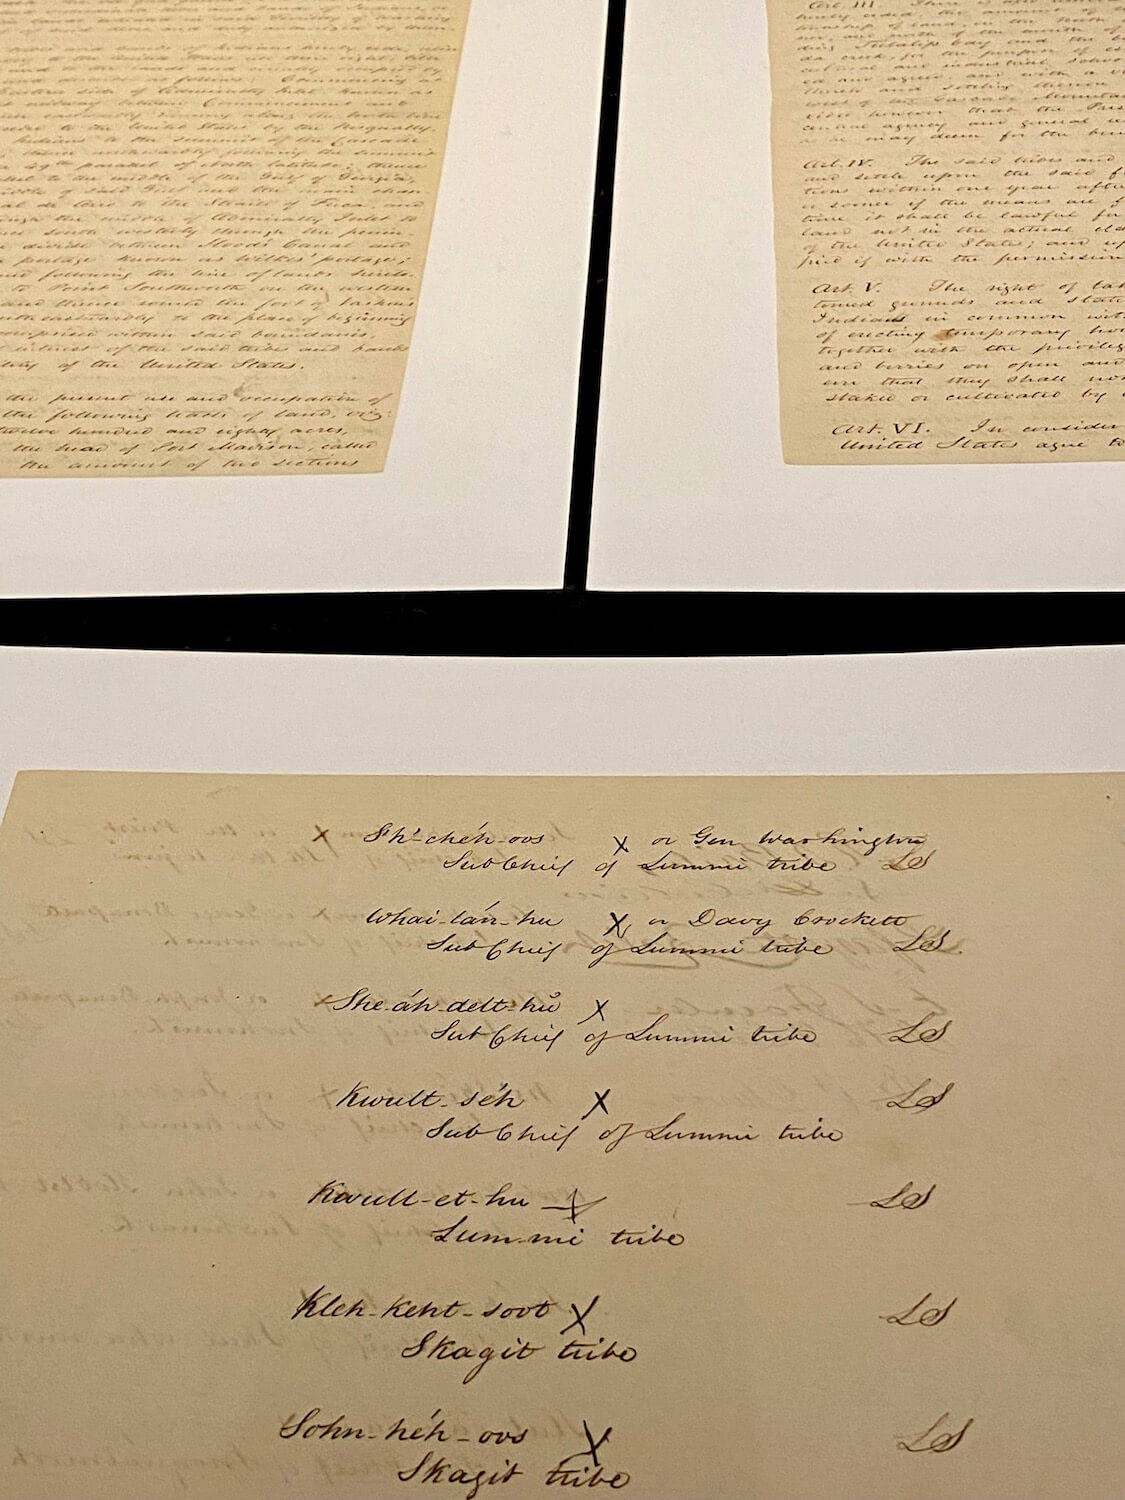 A photo from the Hibulb Cultural Center of the Point Elliott Treaty, which is on display.  Here the parchment paper can be seen with black calligraphy letters followed by X's for each Indian signatory of the 1855 event. 